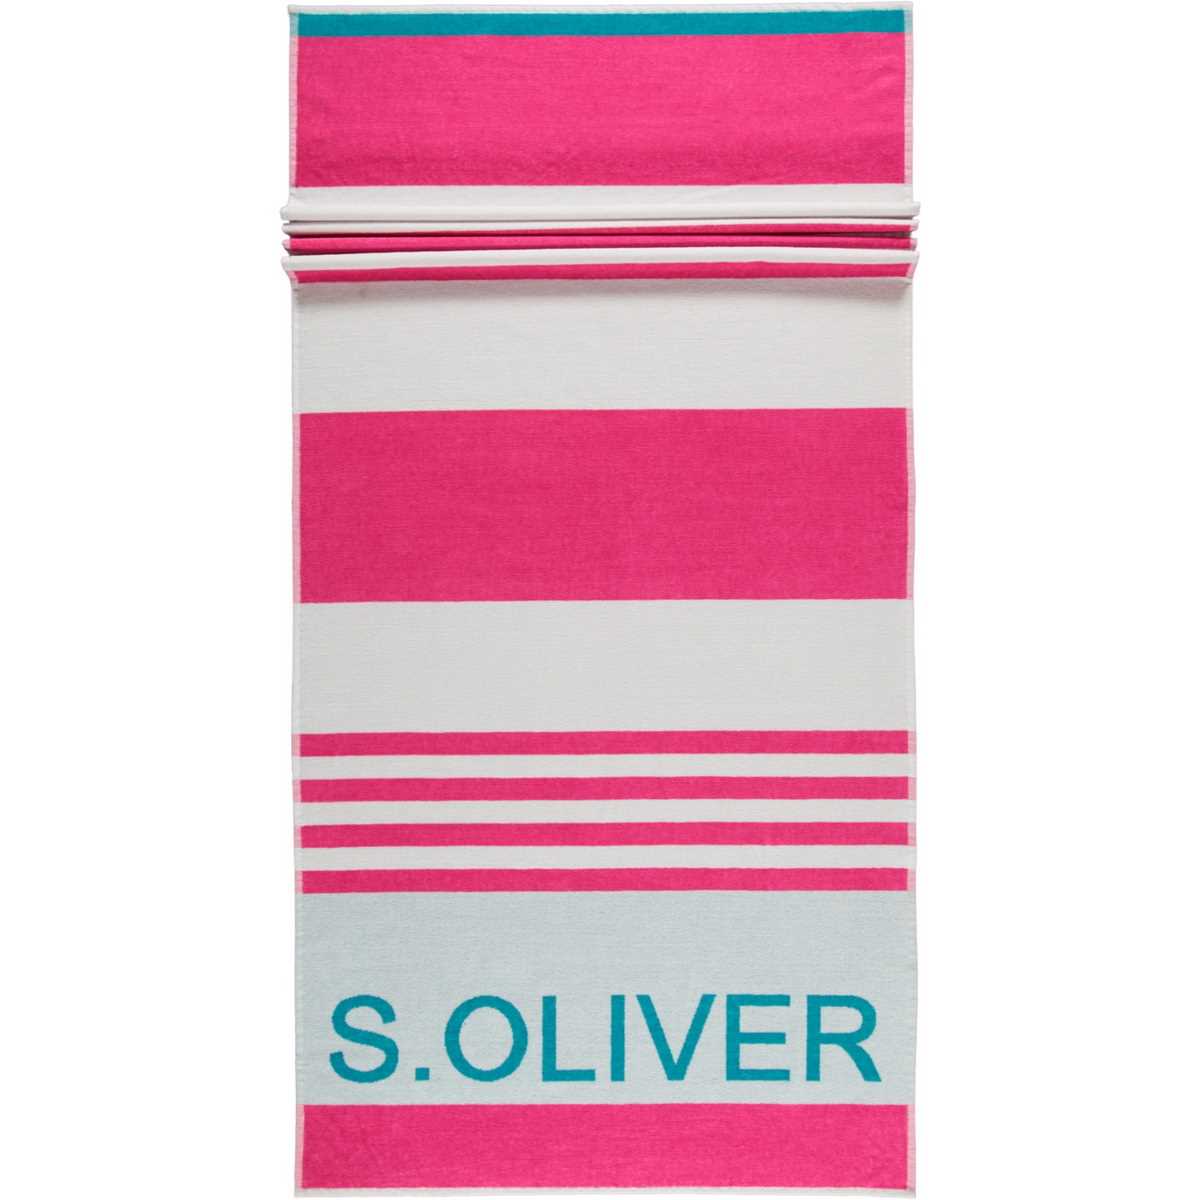 s.Oliver beach towel 80x180 3707-24 pink